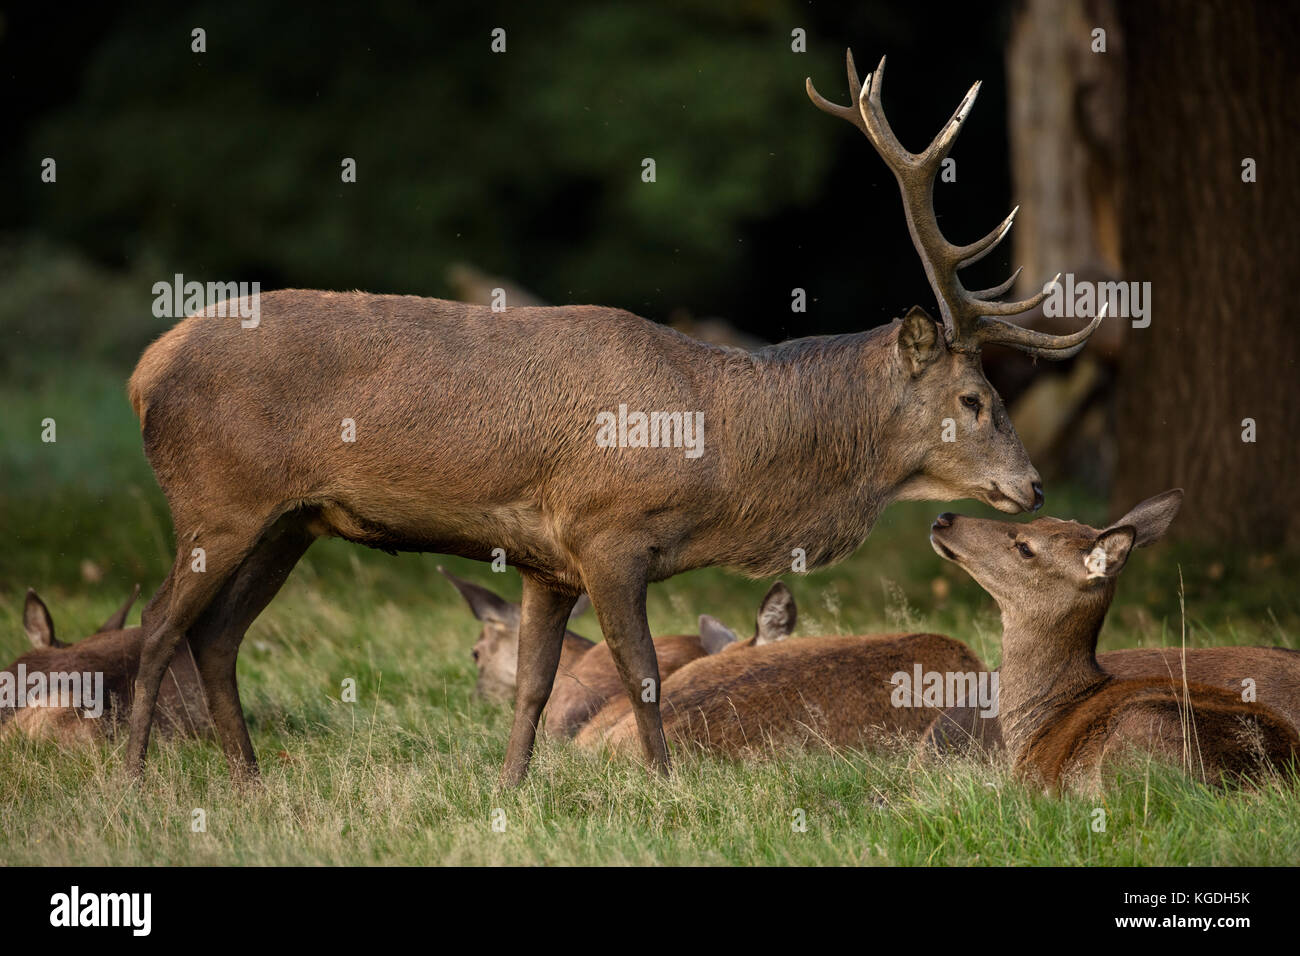 red deer (Cervus elaphus), Stag during rut, interacting with one of the females in his harem, England, U.K. Stock Photo